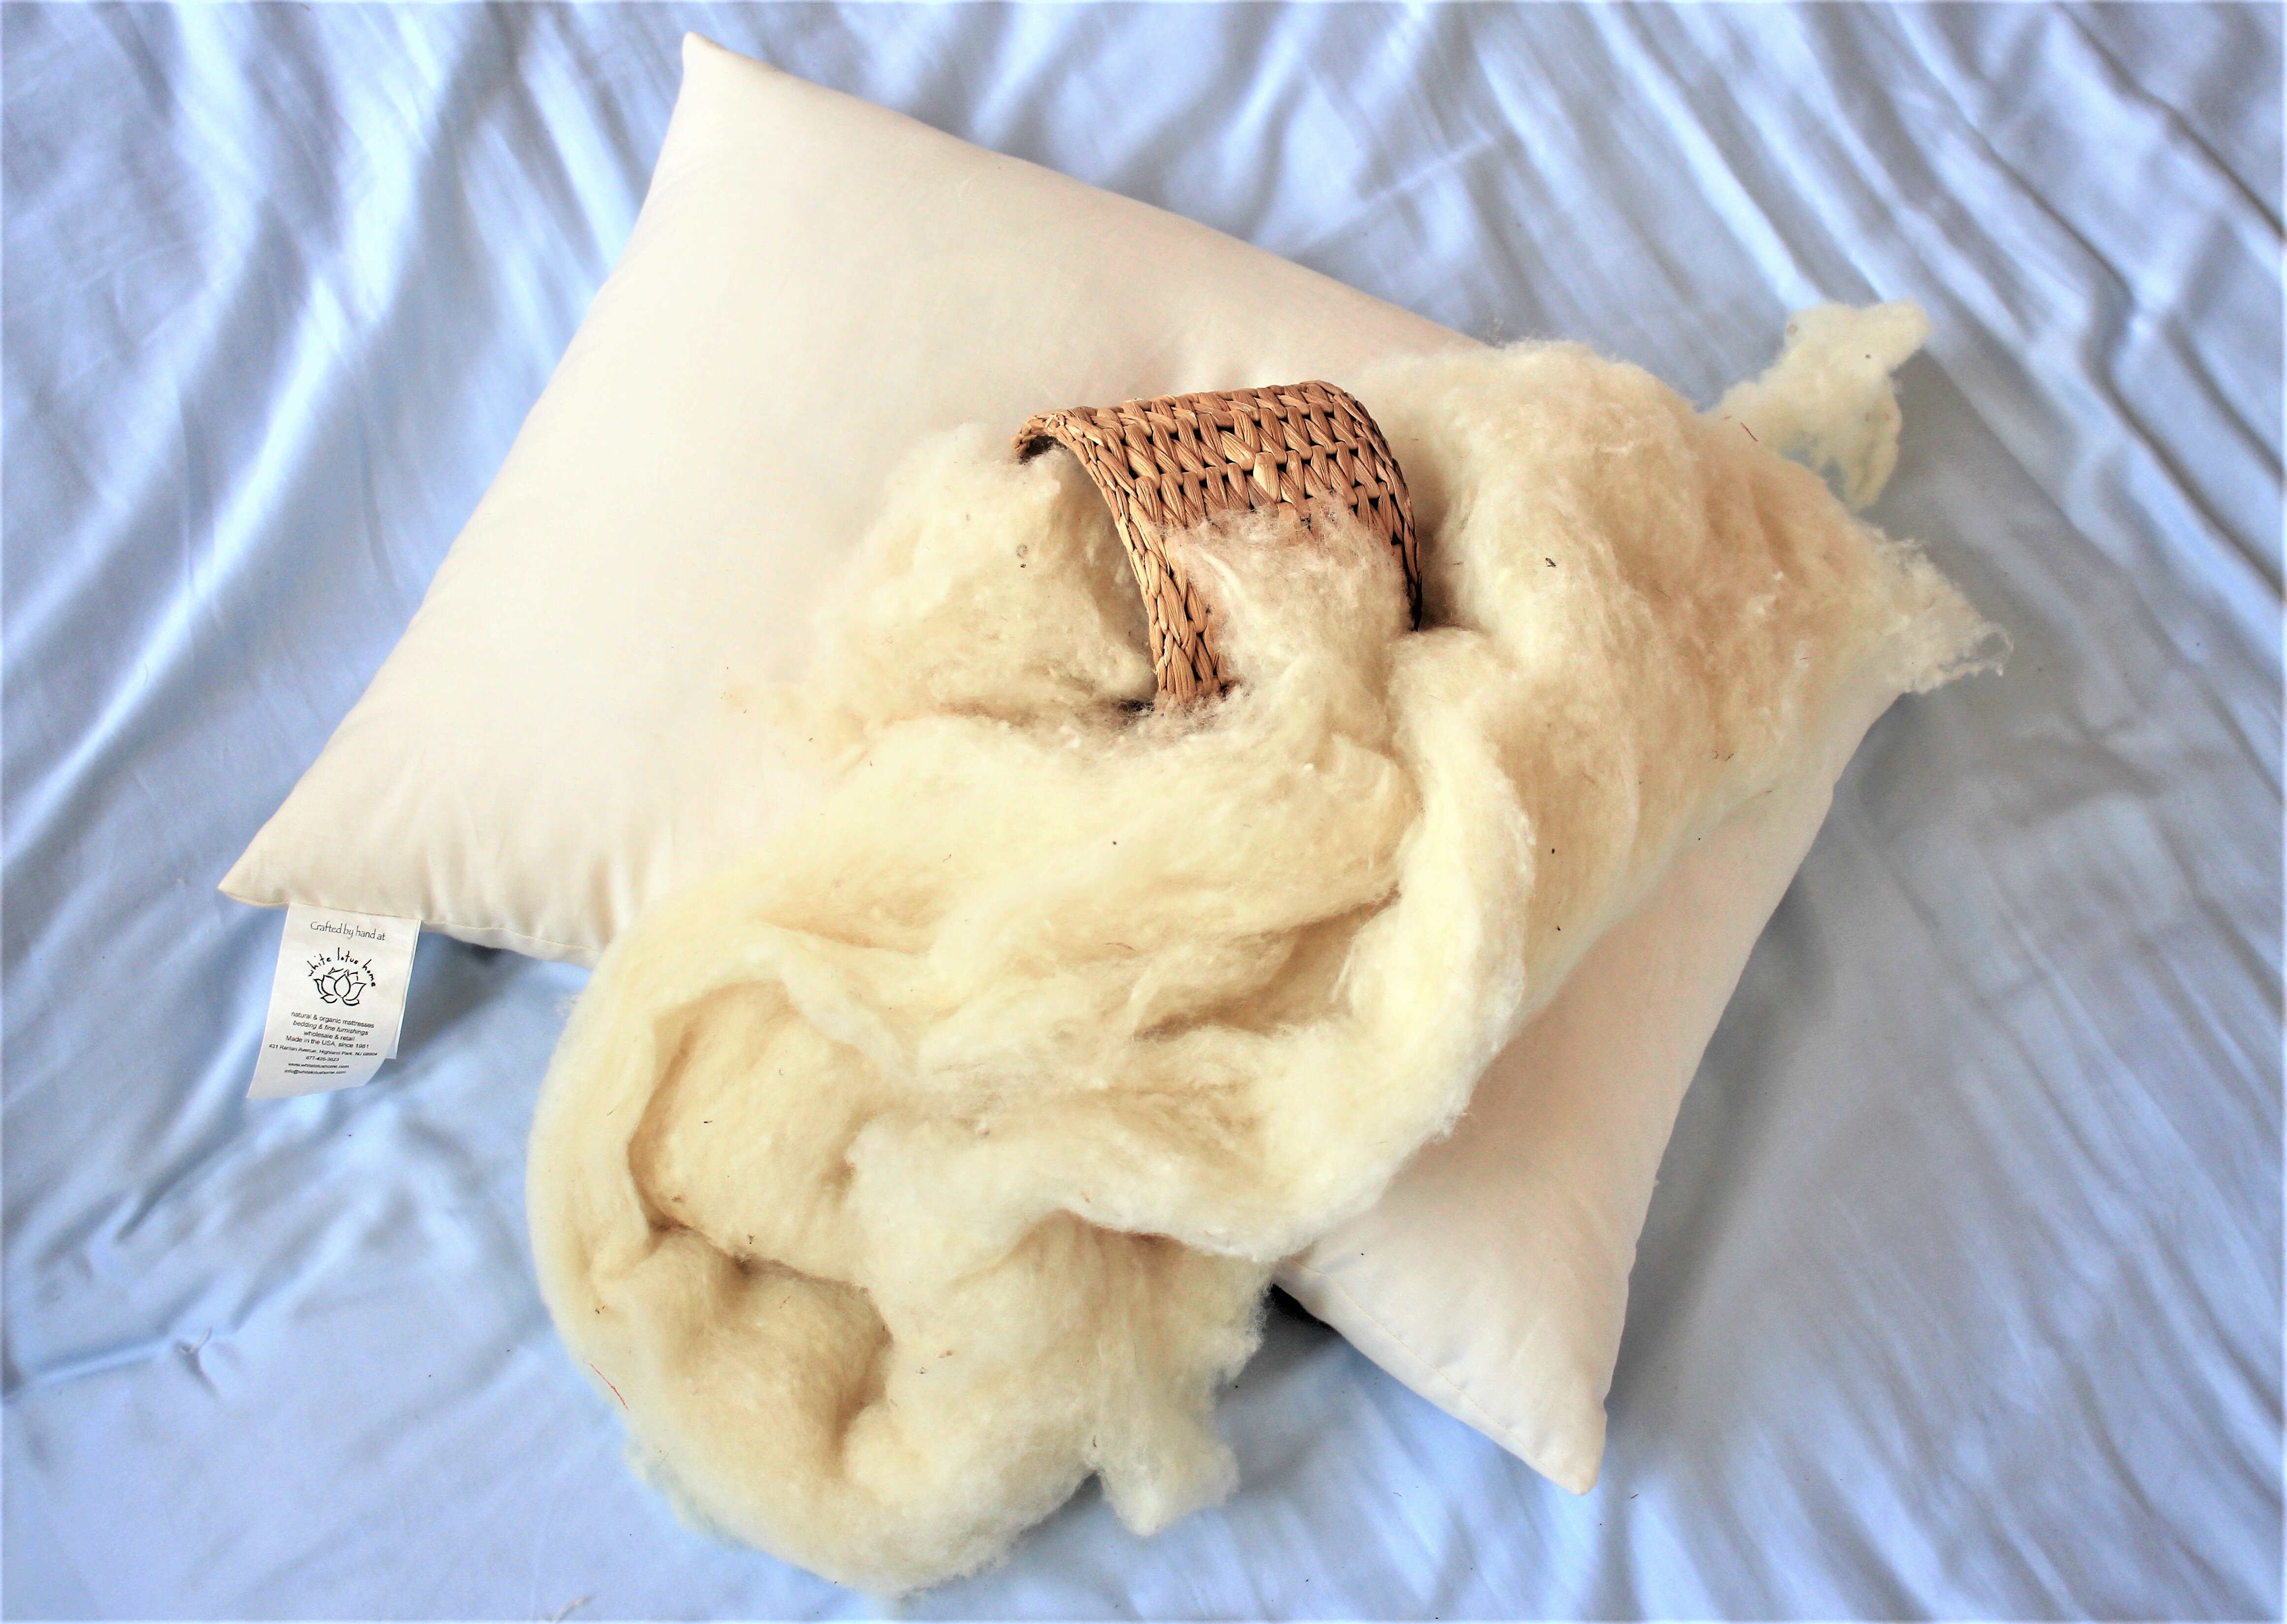 wool bed pillows